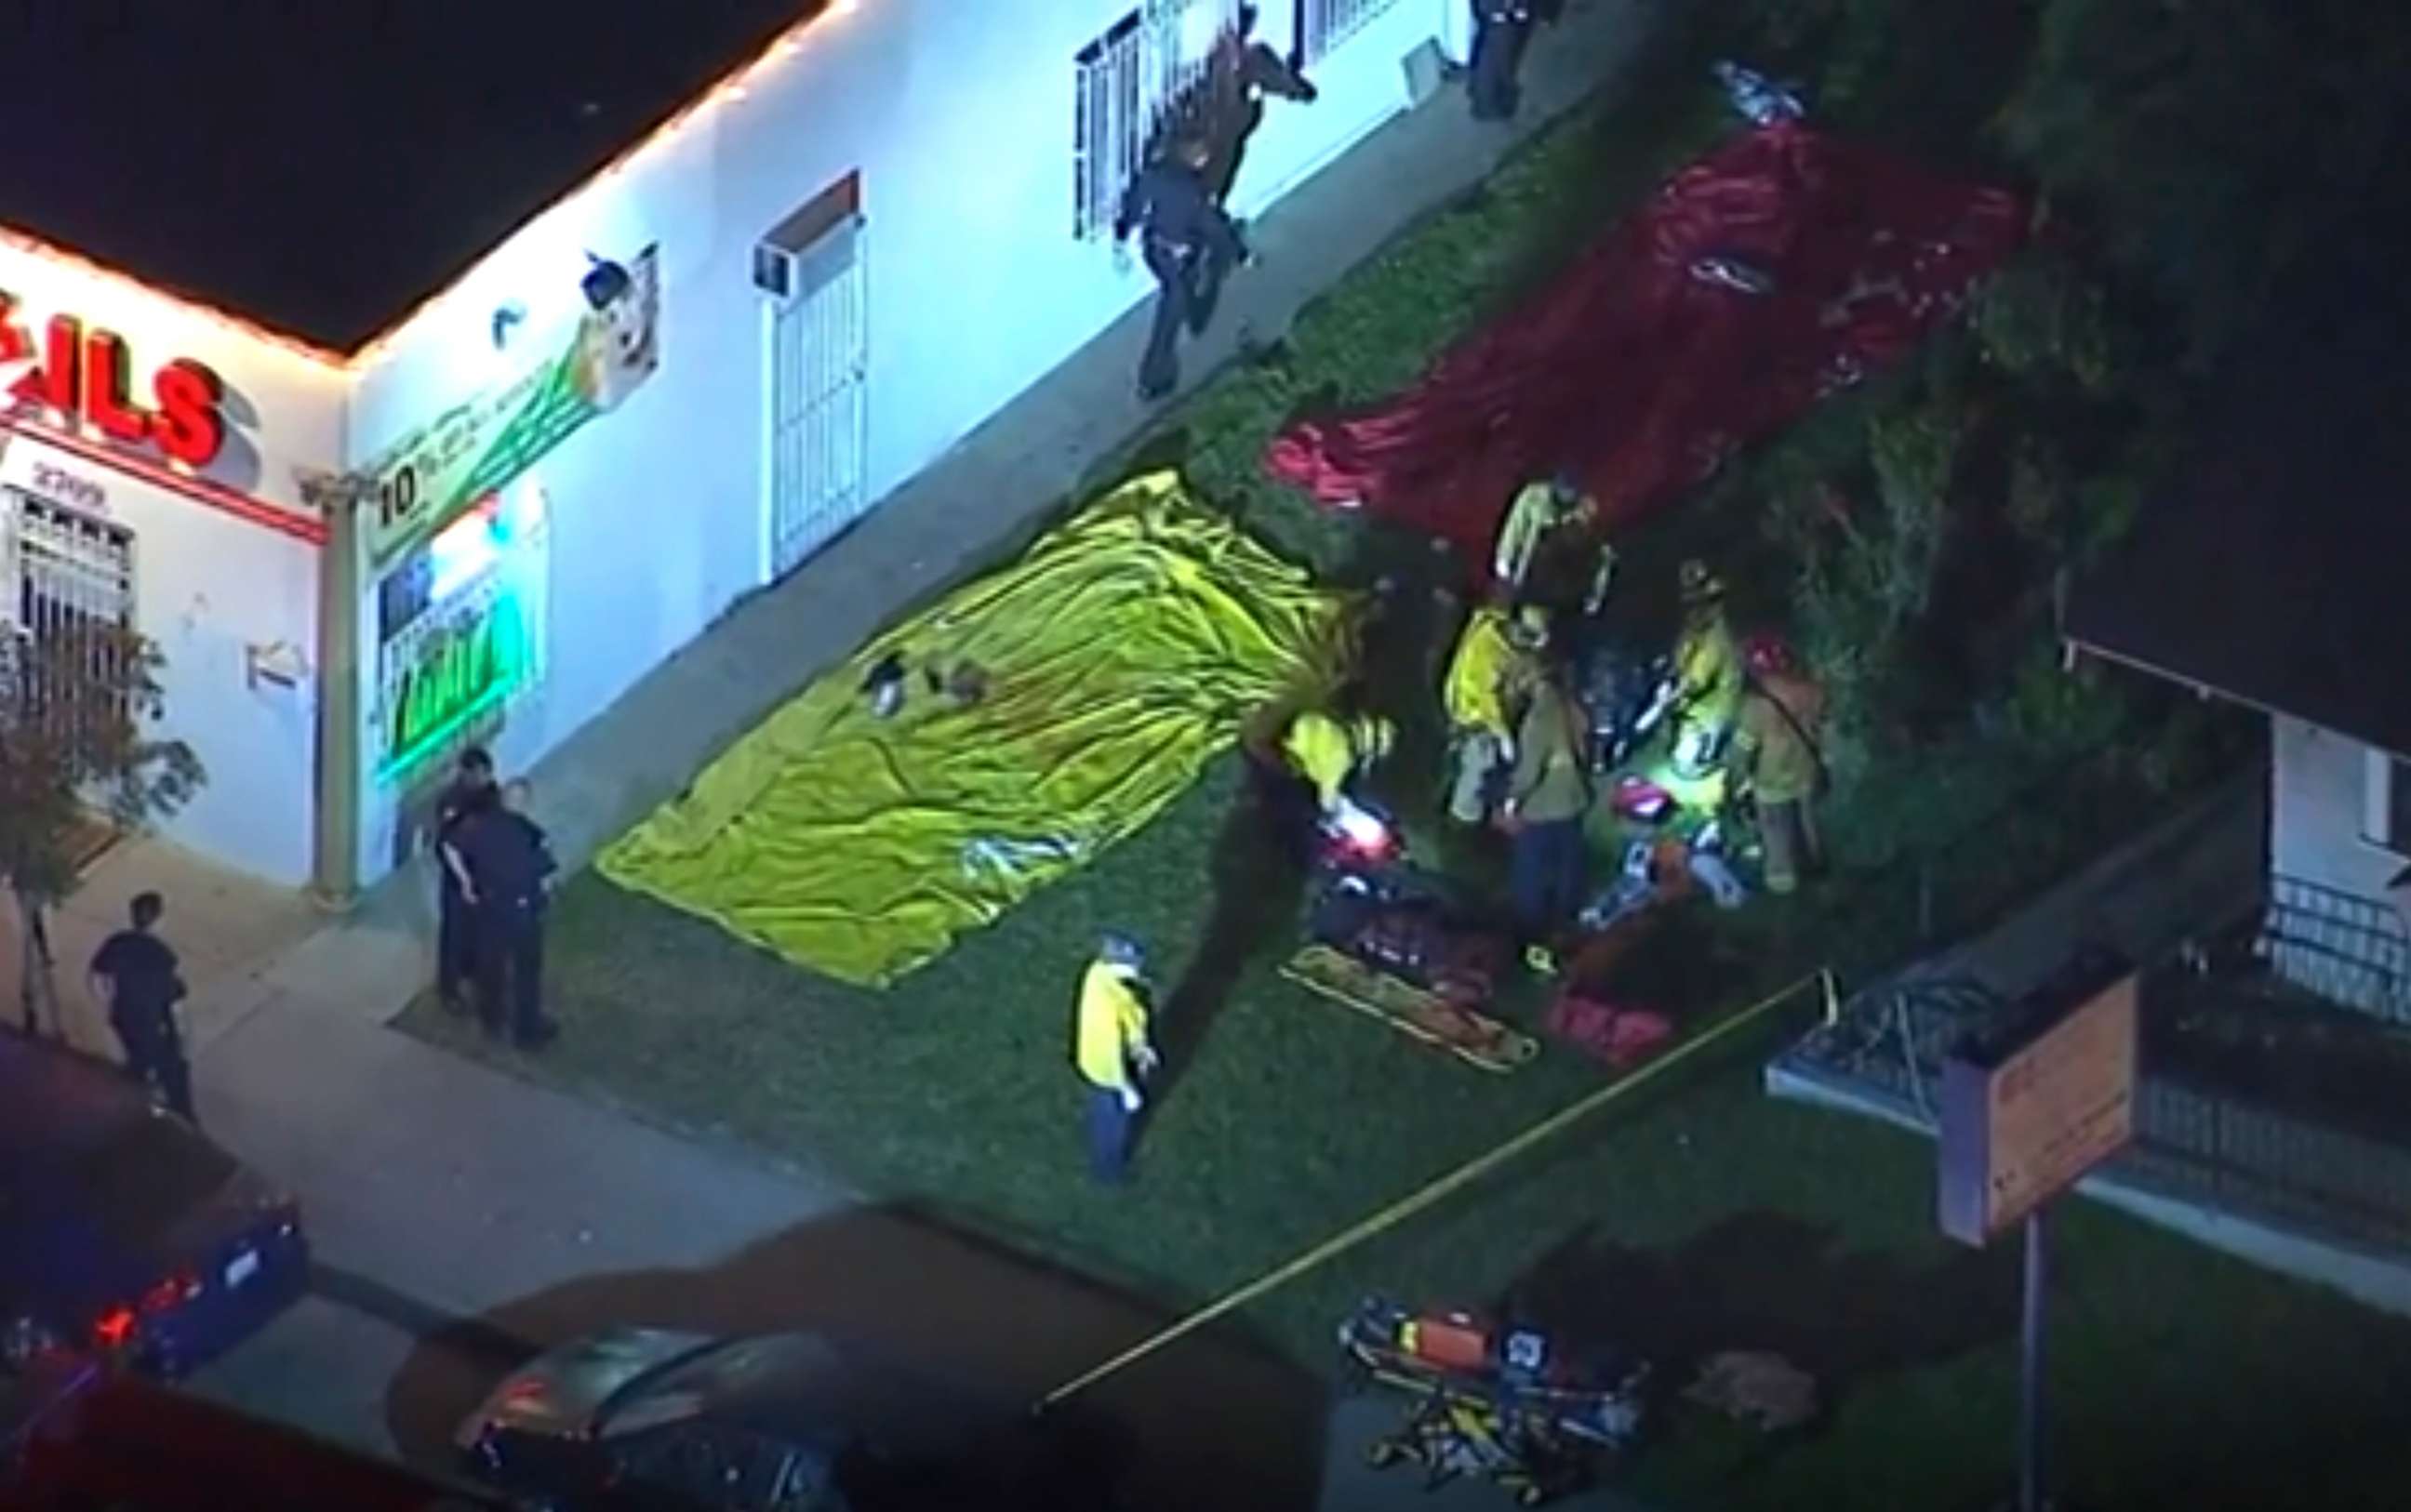 PHOTO: In this aerial image made from video shows the scene where emergency workers have cordoned off an area to deal with victims of a shooting, early Wednesday, Oct. 30, 2019, in Long Beach, Ca. (KABC via AP)